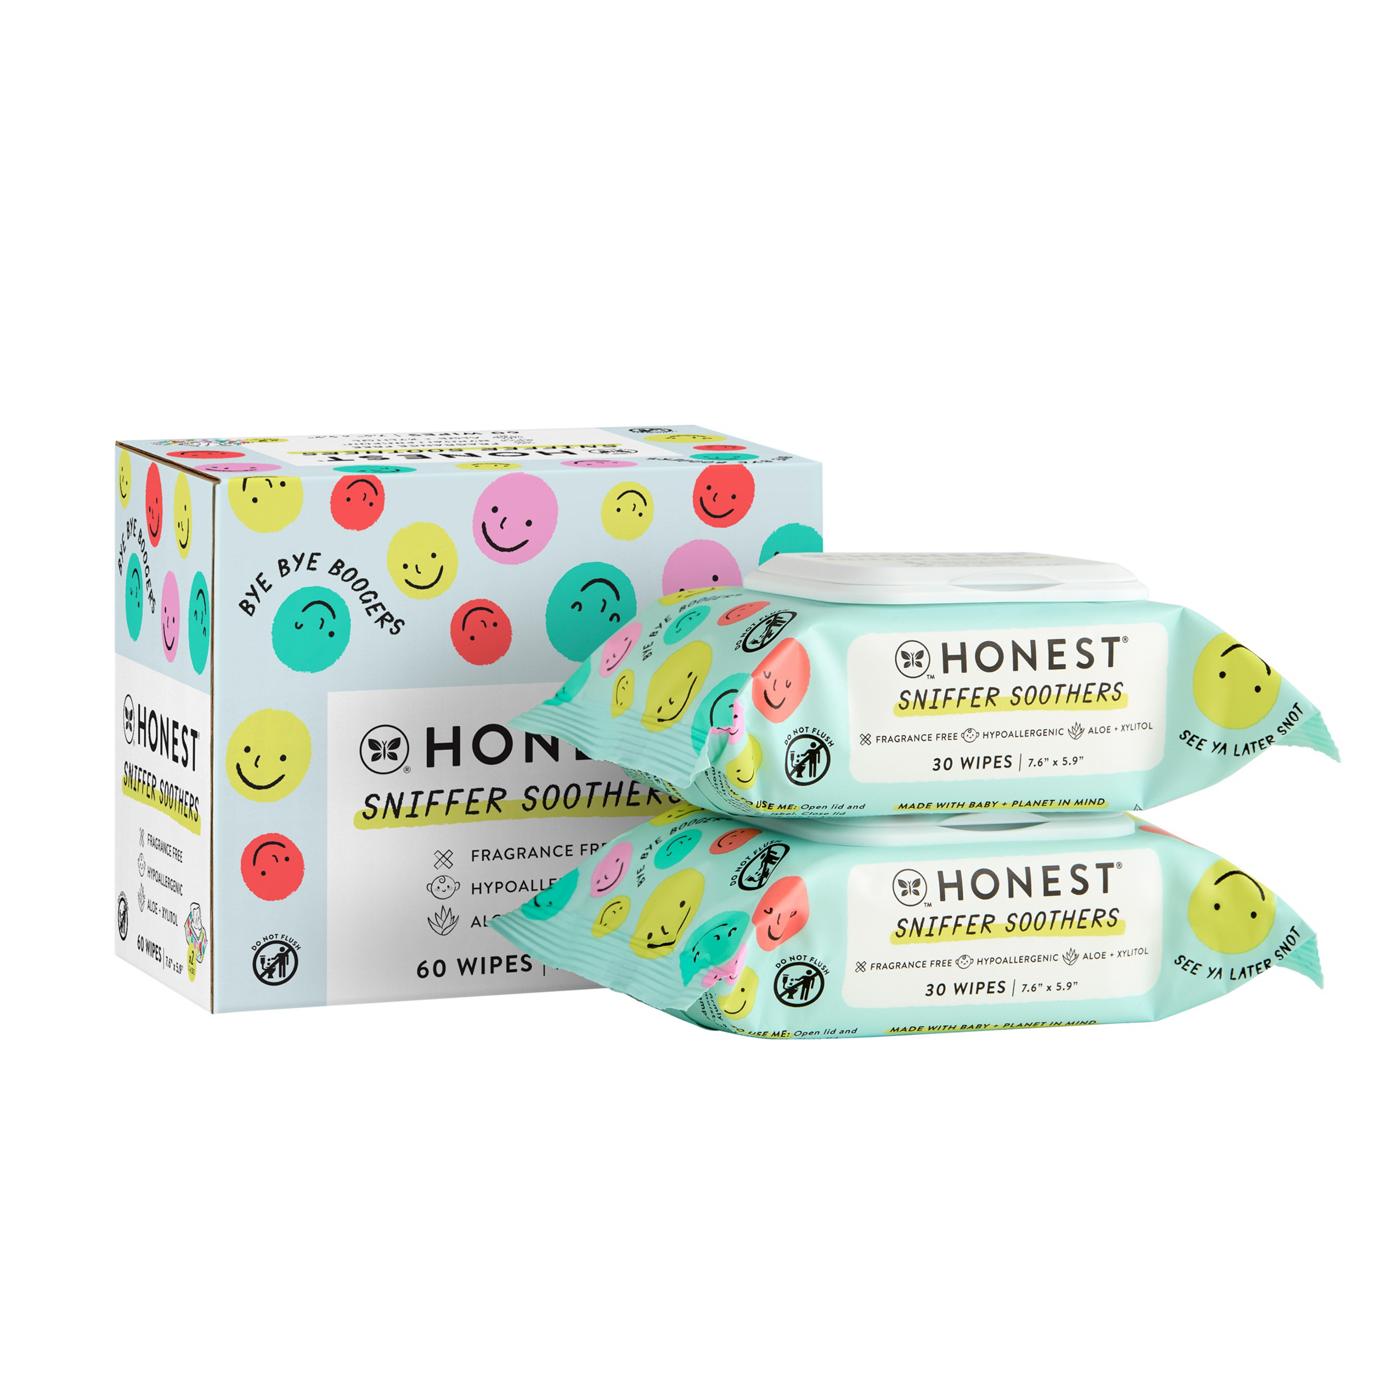 The Honest Company Sniffer Soothers Wipes; image 2 of 5